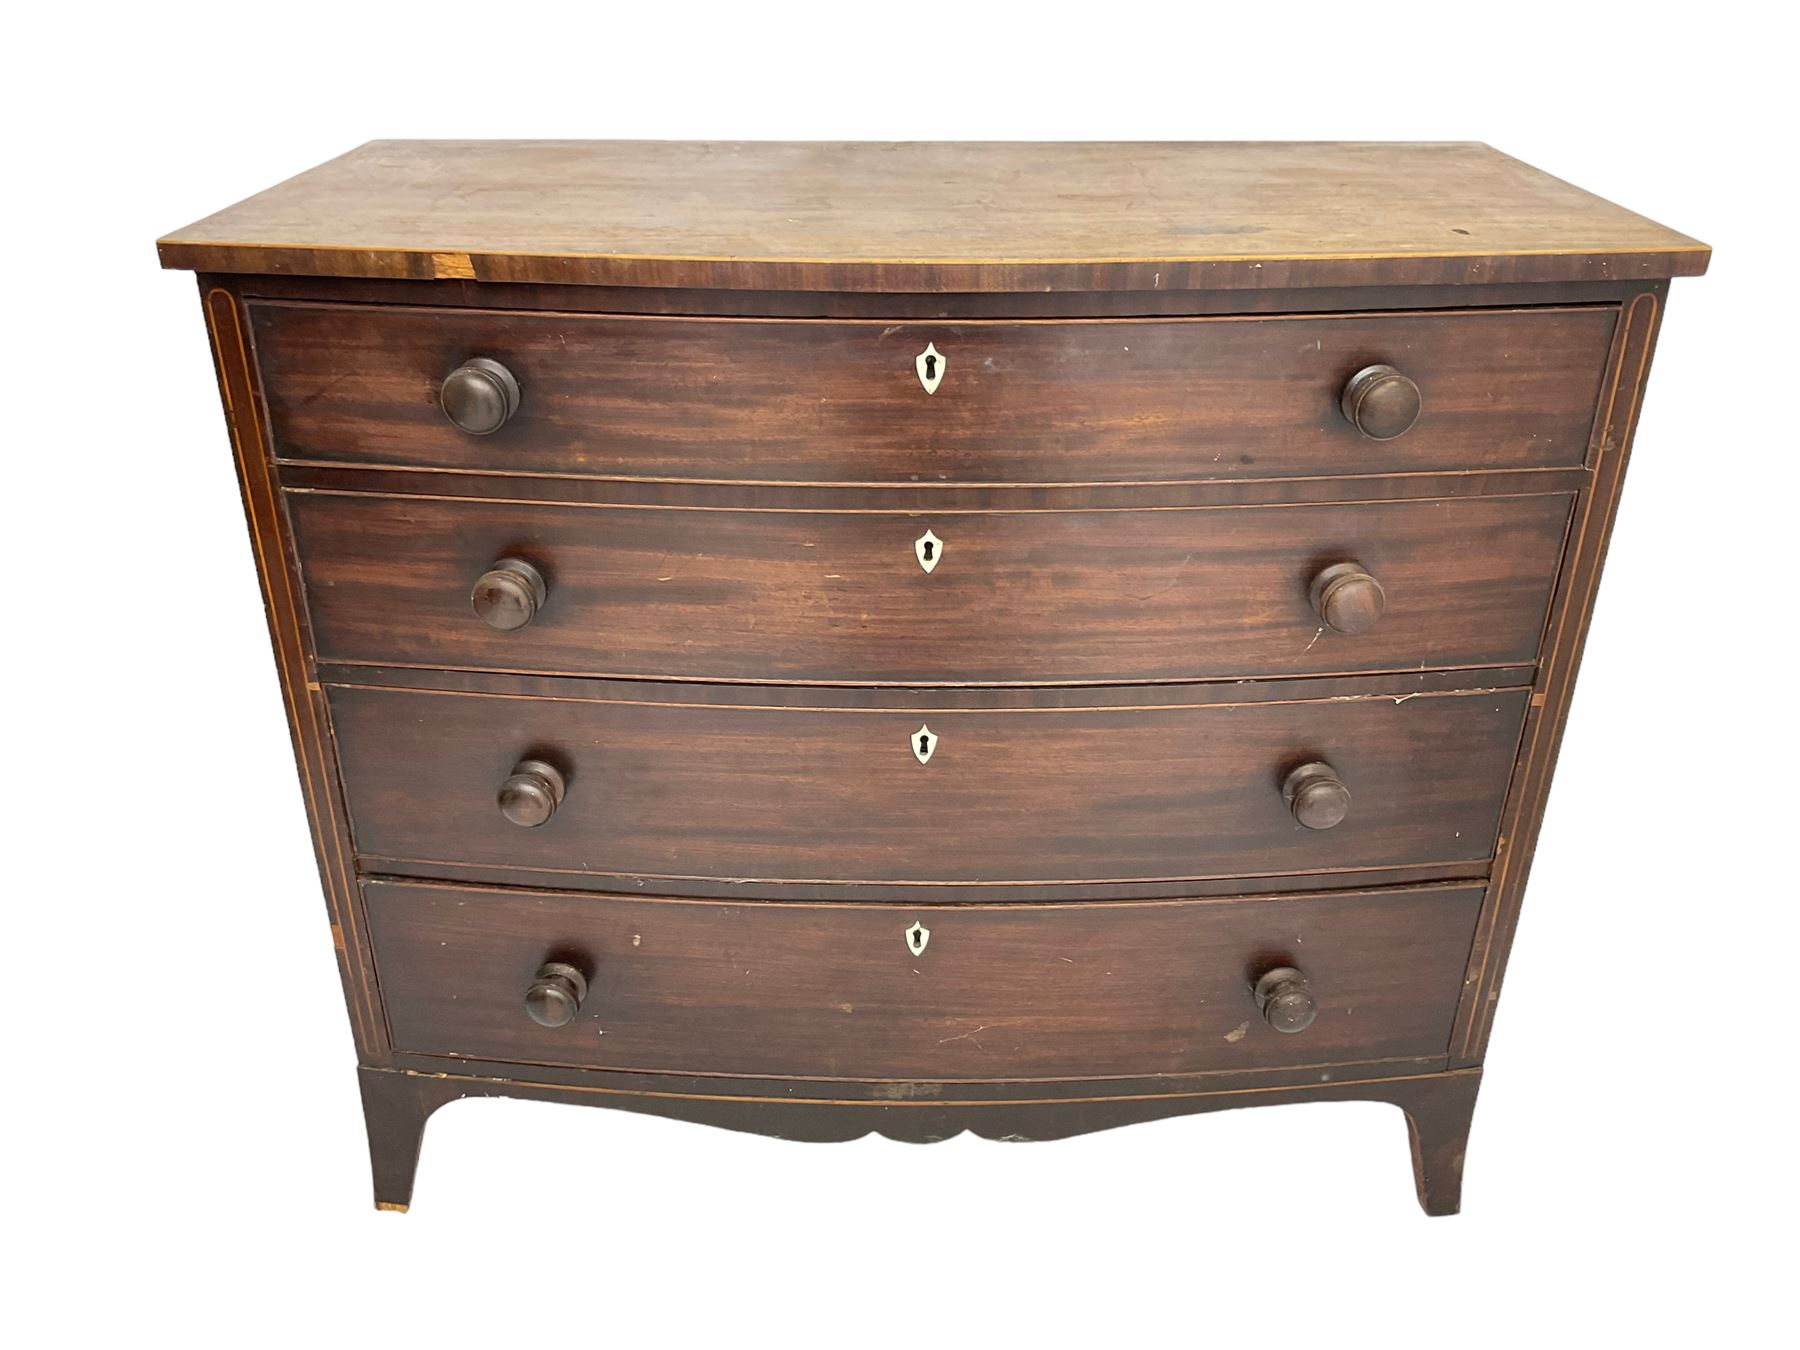 George III mahogany bow-front chest - Image 3 of 10